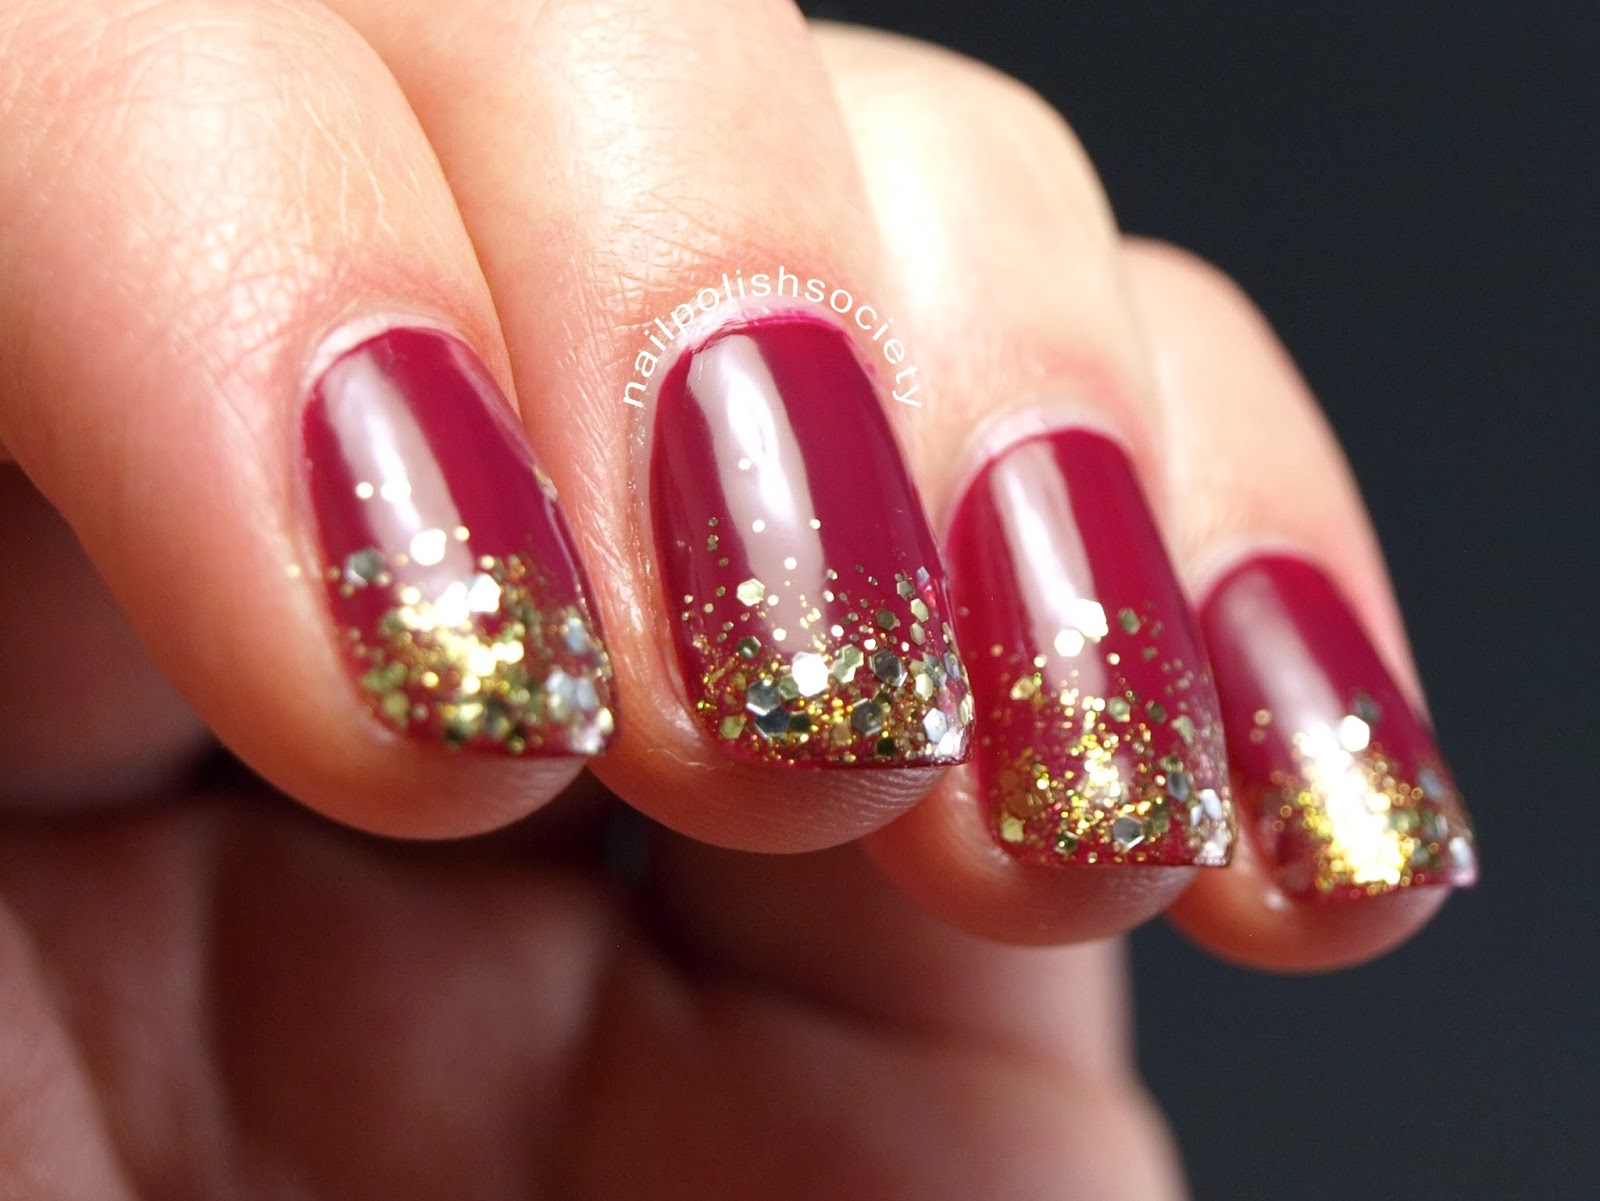 2. Metallic Party Nails - wide 3